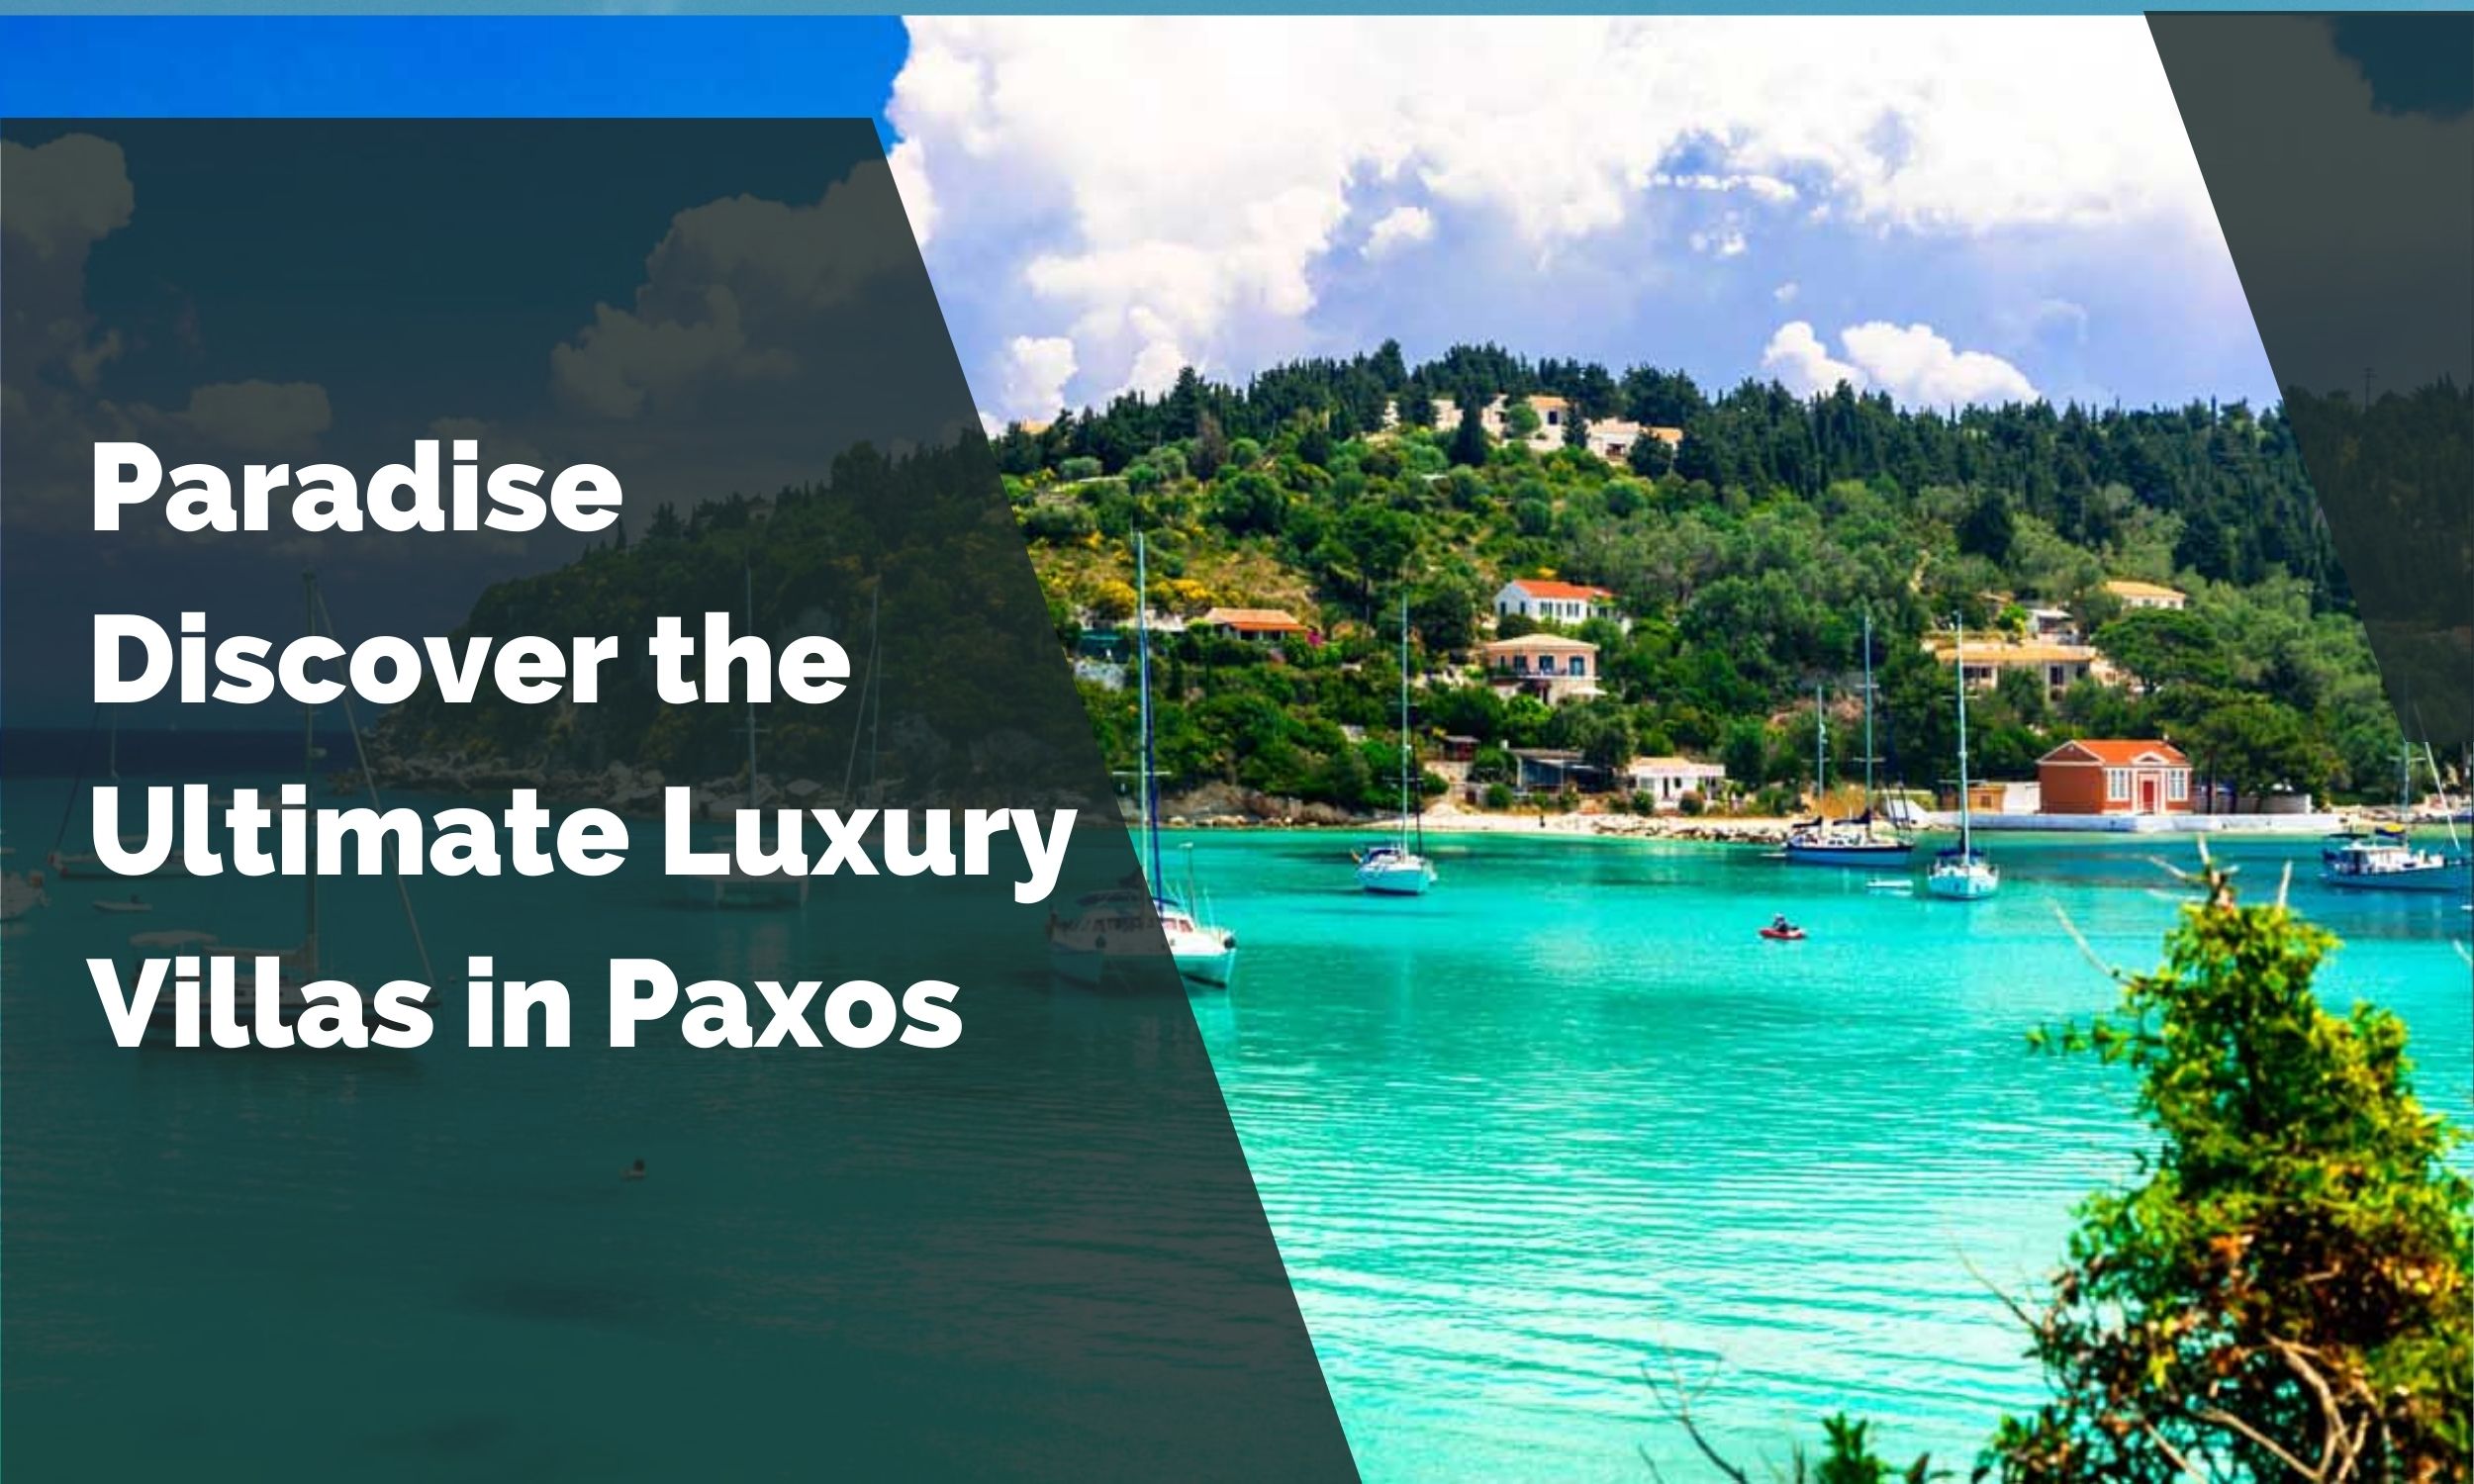 Escape to Paradise Discover the Ultimate Luxury Villas in Paxos